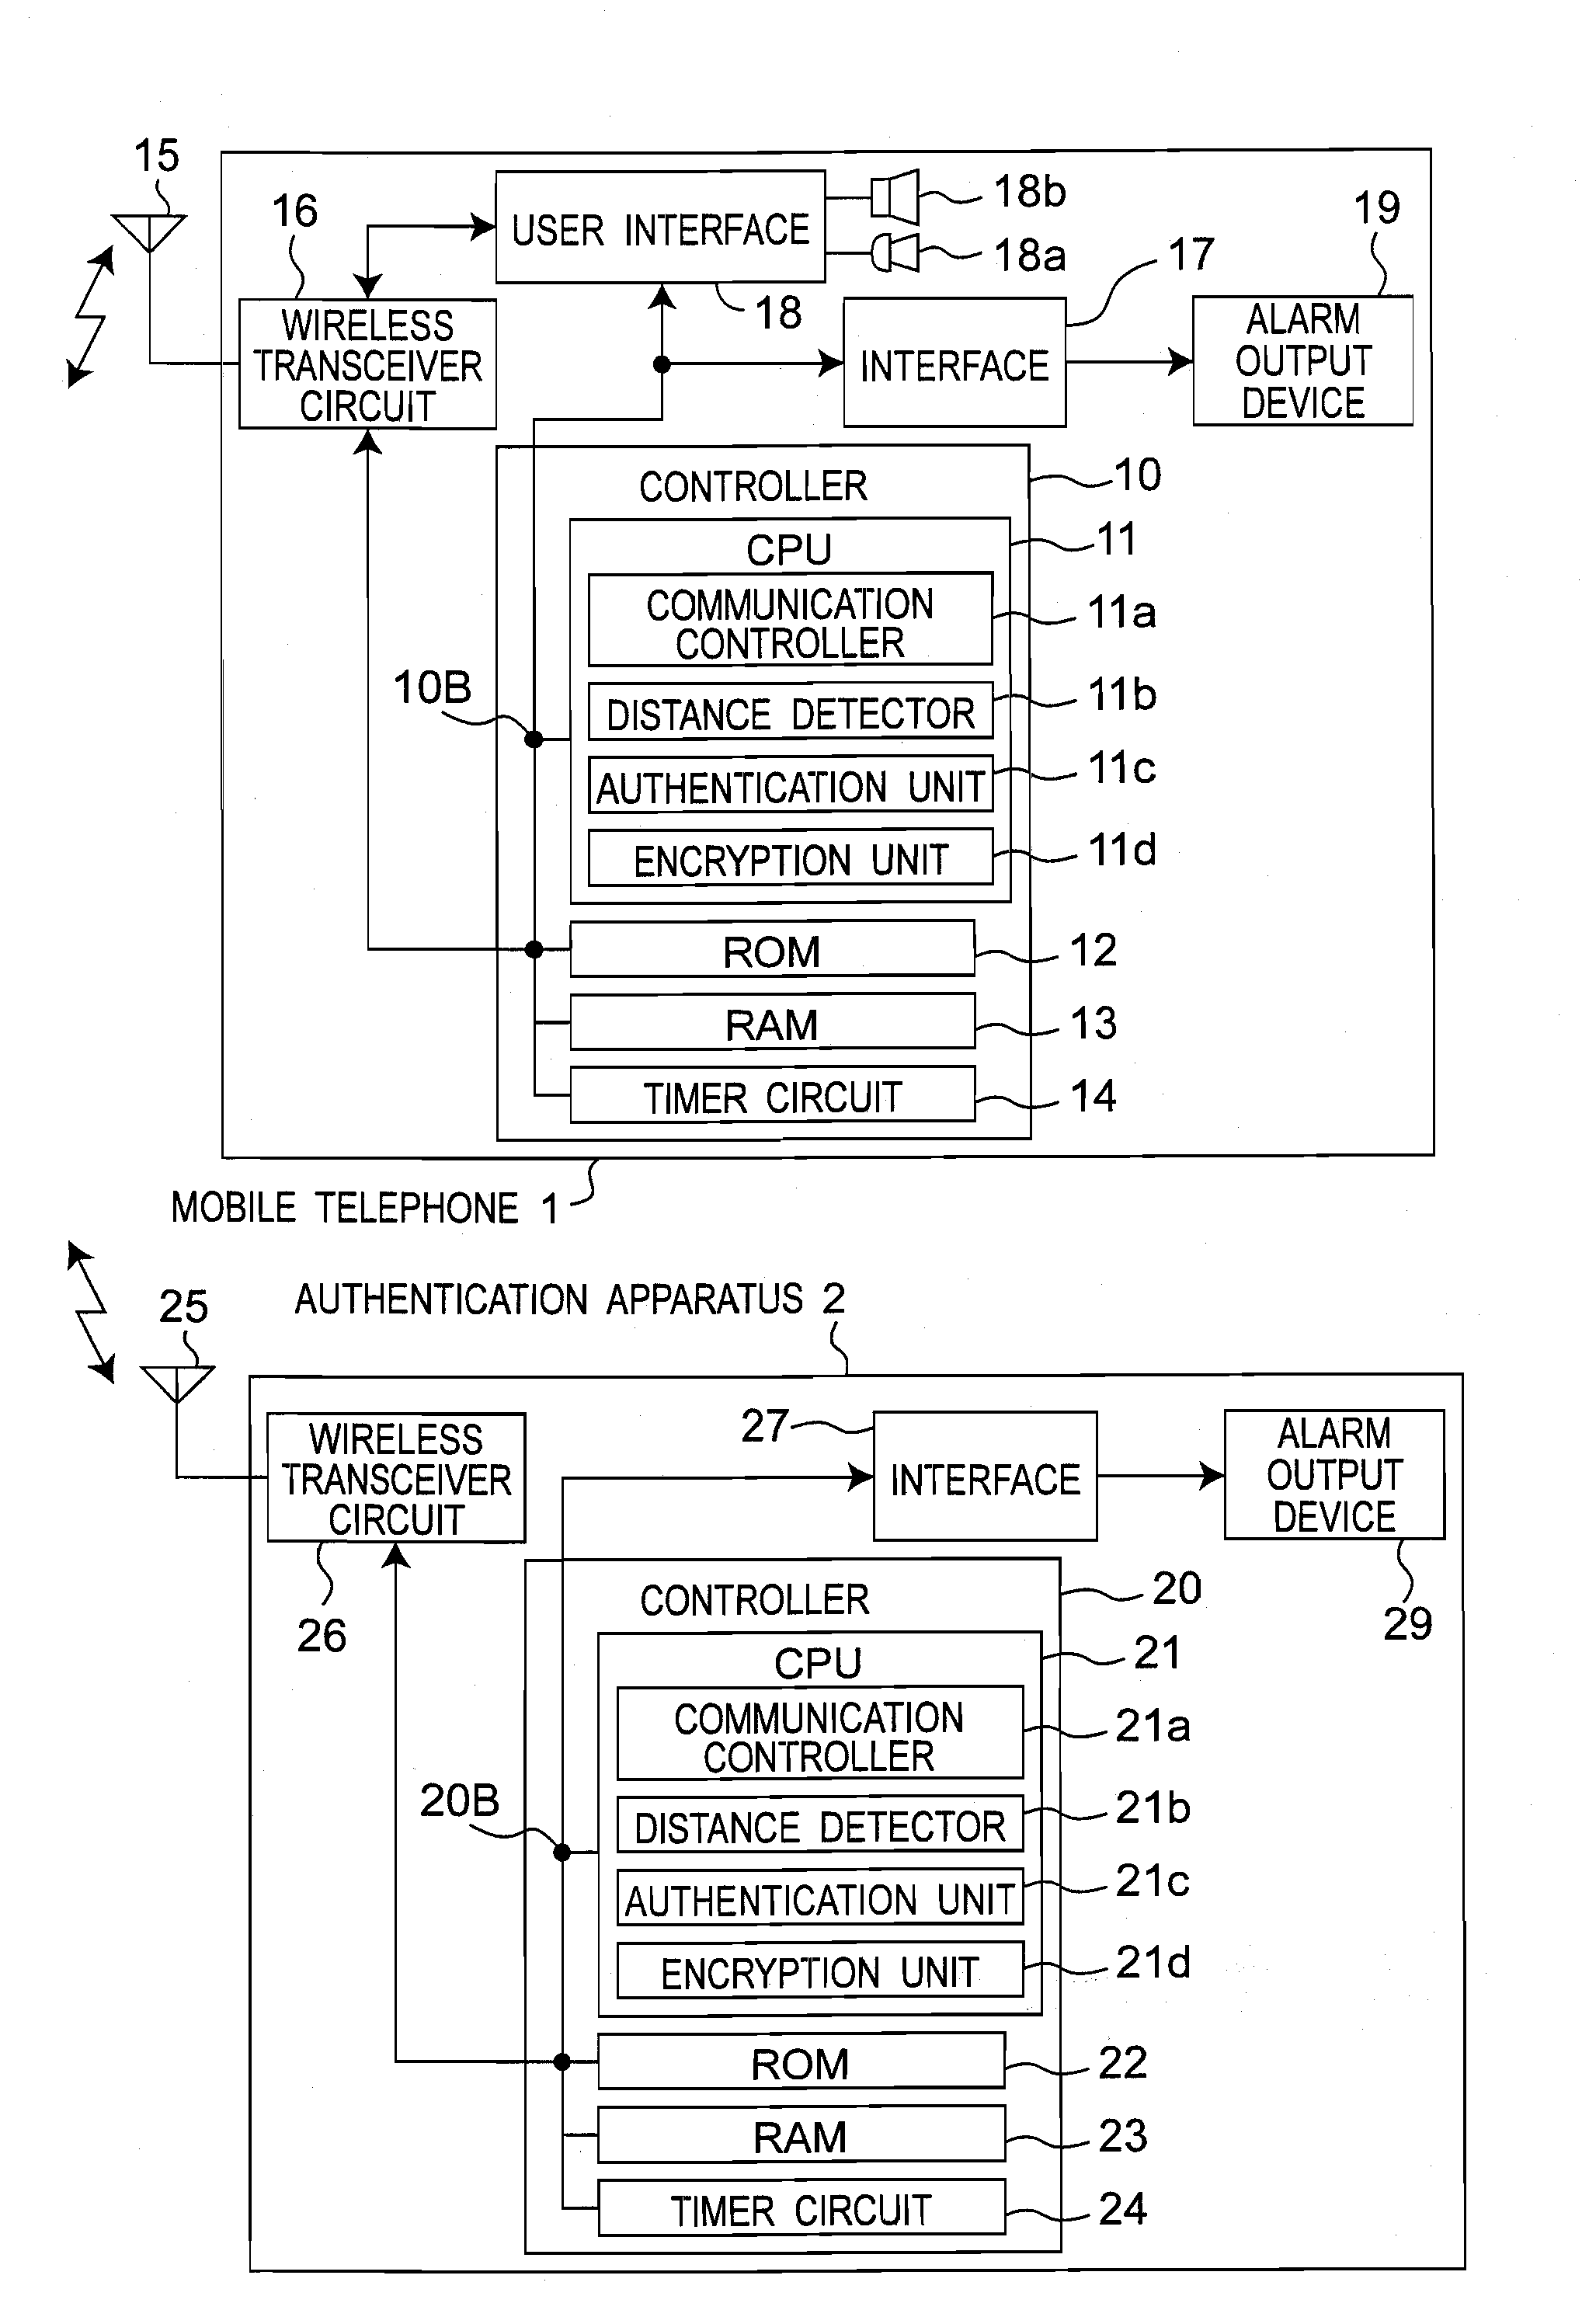 Wireless device monitoring system including unauthorized apparatus
and authentication apparatus with security authentication function